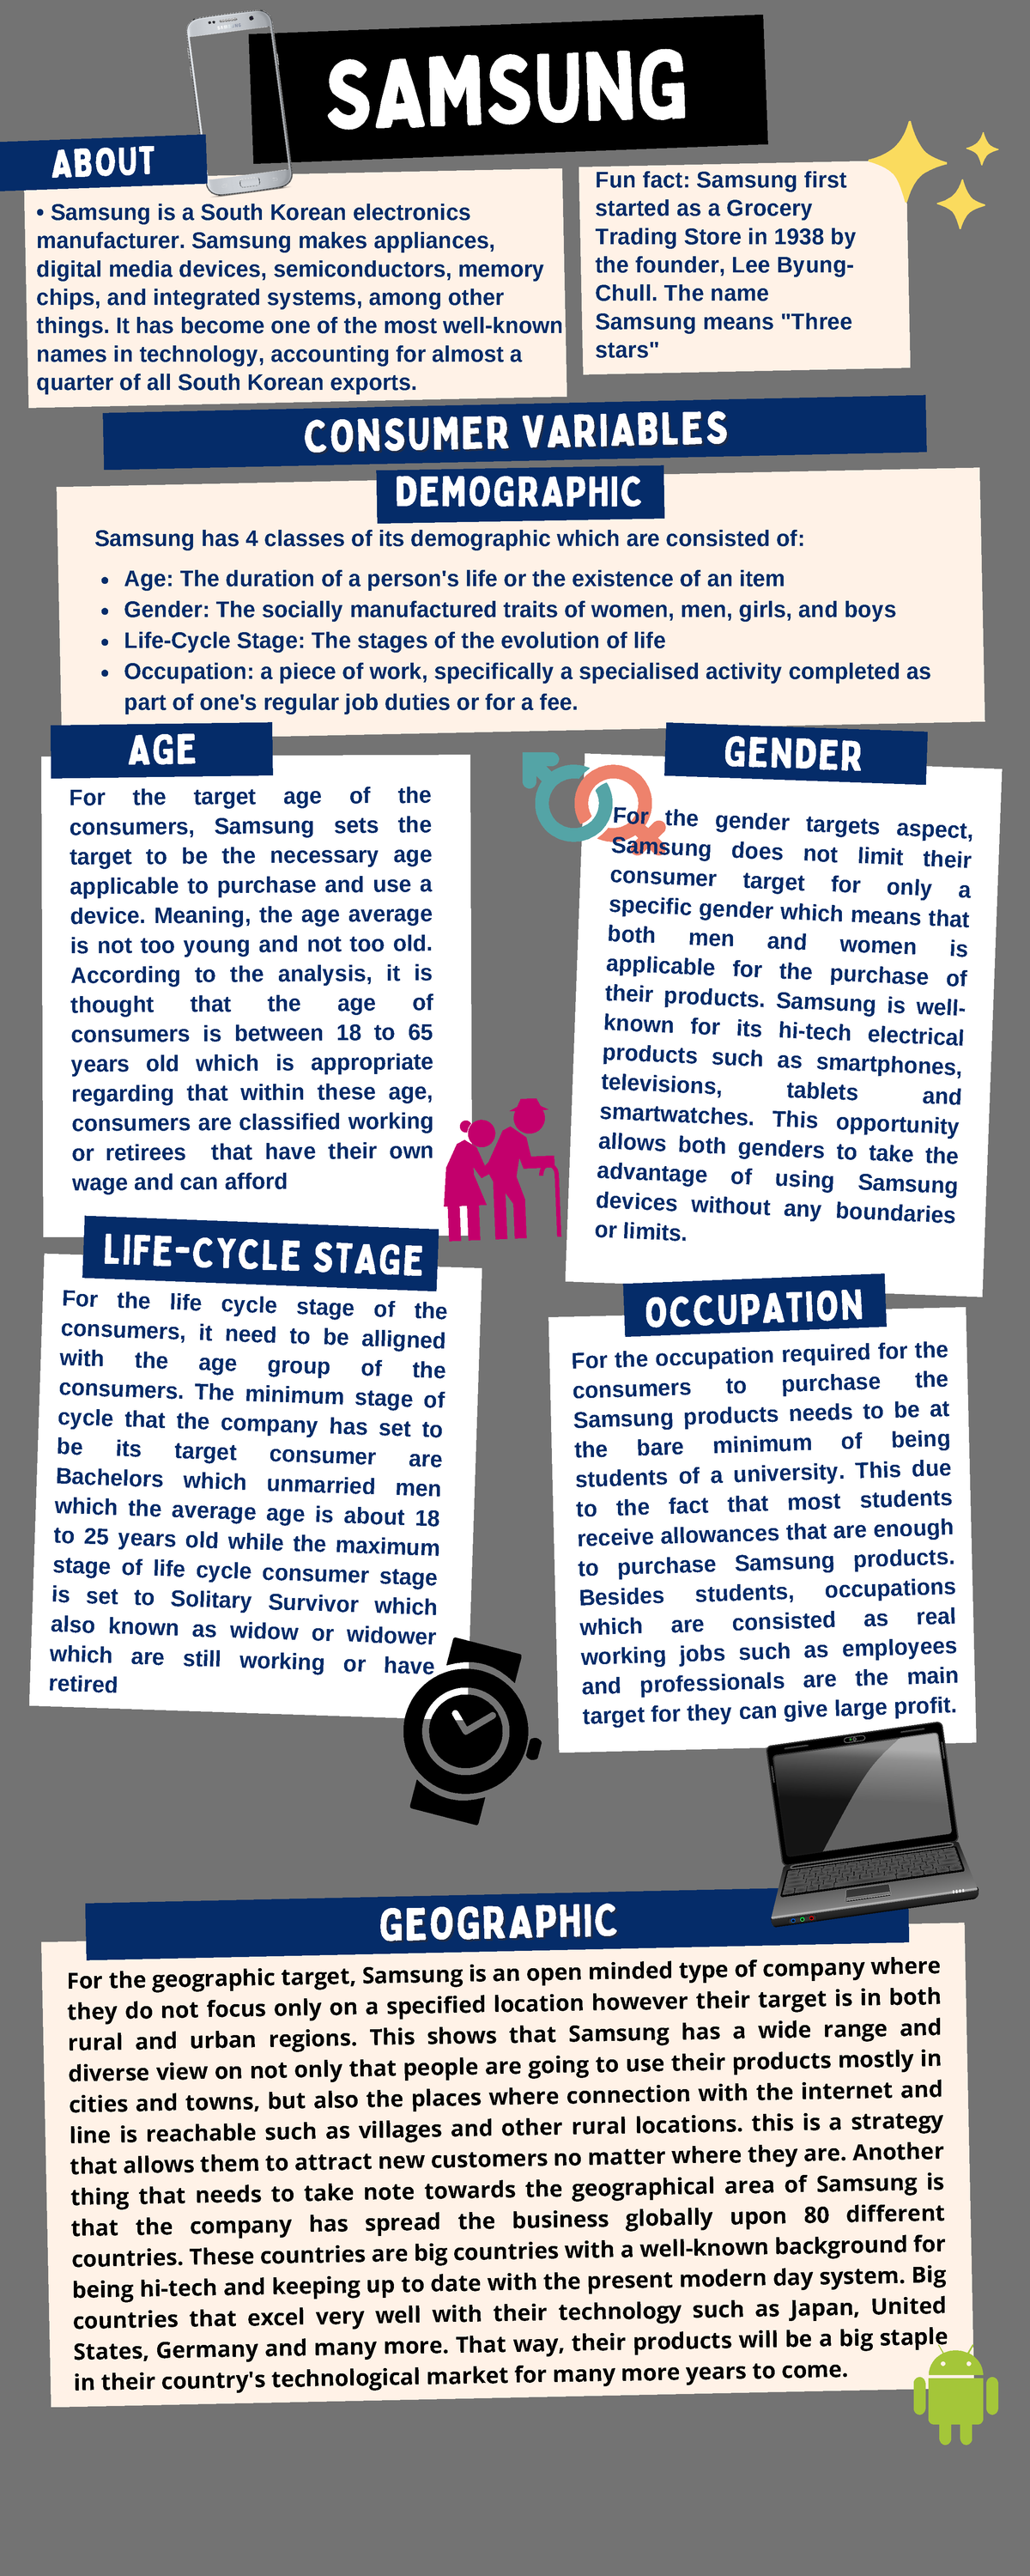 mkt558 group assignment 1 infographic